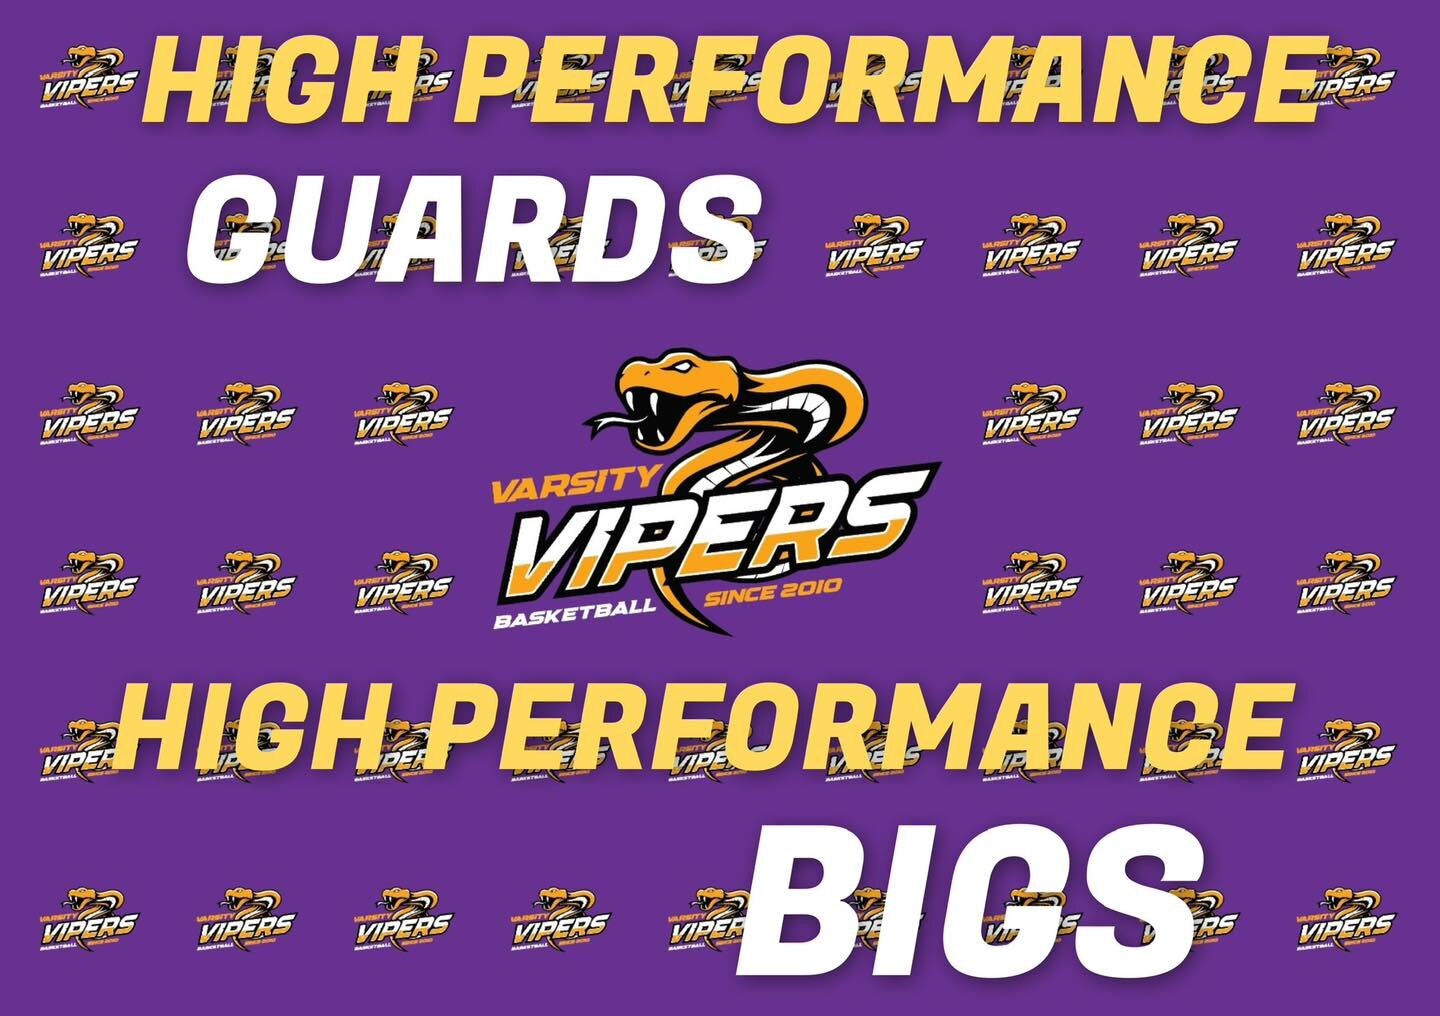 HIGH PERFORMANCE HOOPS ARE BACK!

High Performance sessions for our GUARDS &amp; BIGS positions are back for another the Easter break..

GUARDS sessions will focus on:
🏀 Ball handling 🏀 Passing 🏀 On ball defence 🏀  Shooting

BIGS sessions will fo